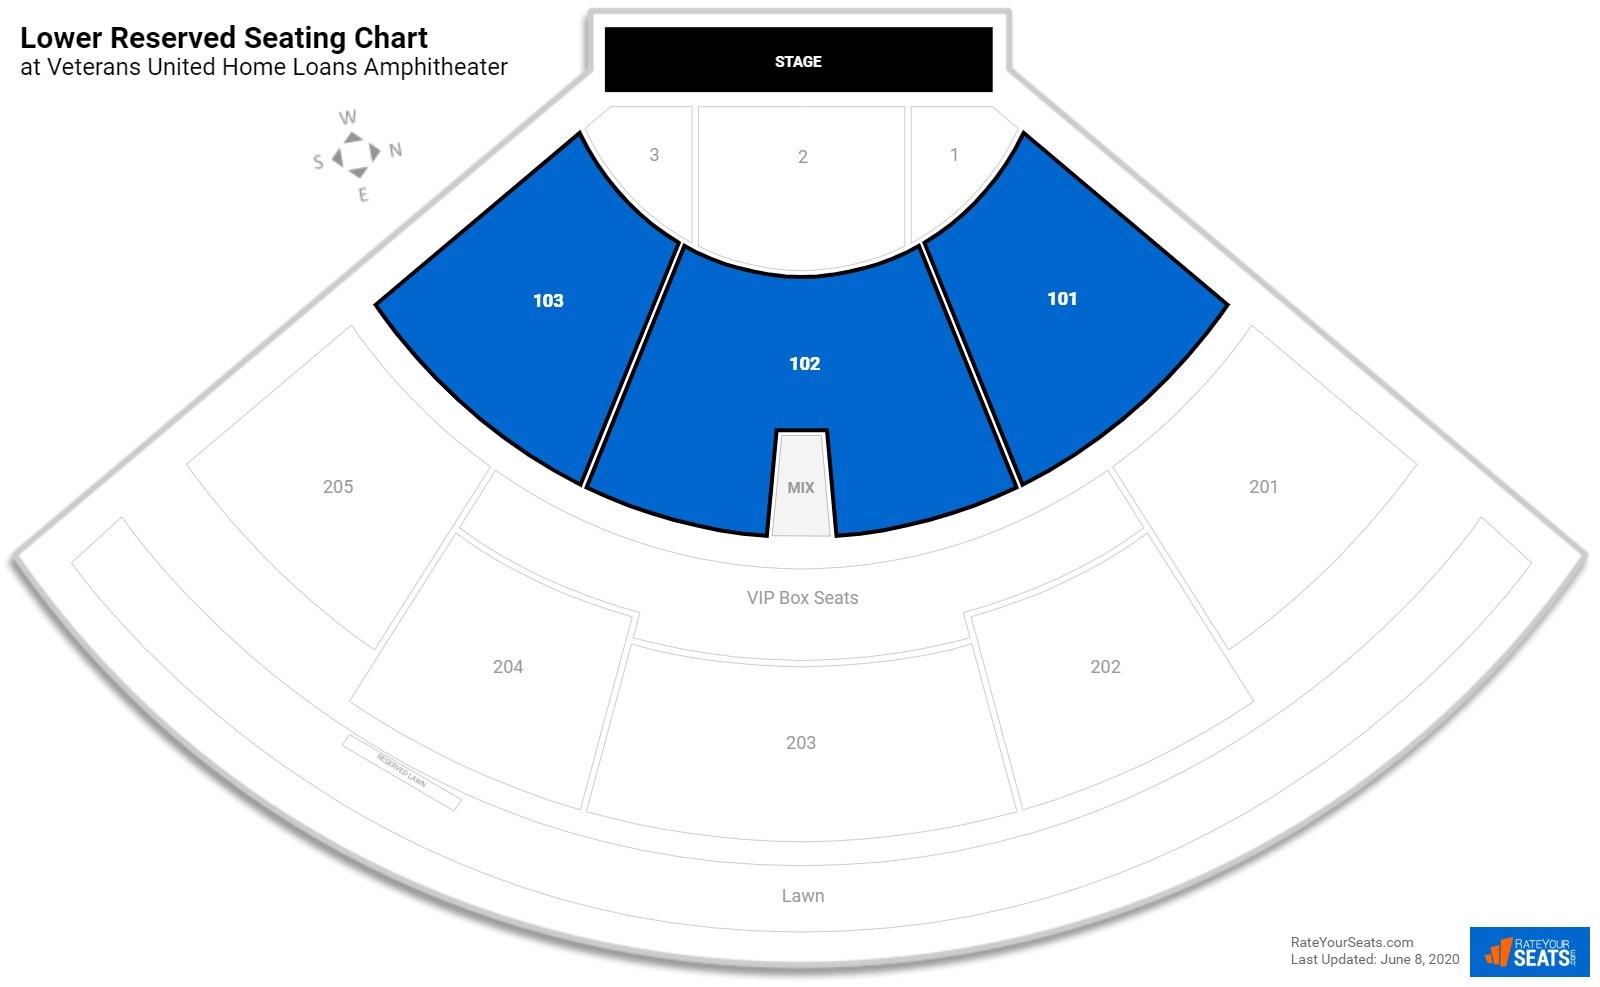 Virginia Home Loans Amphitheater Seating Chart